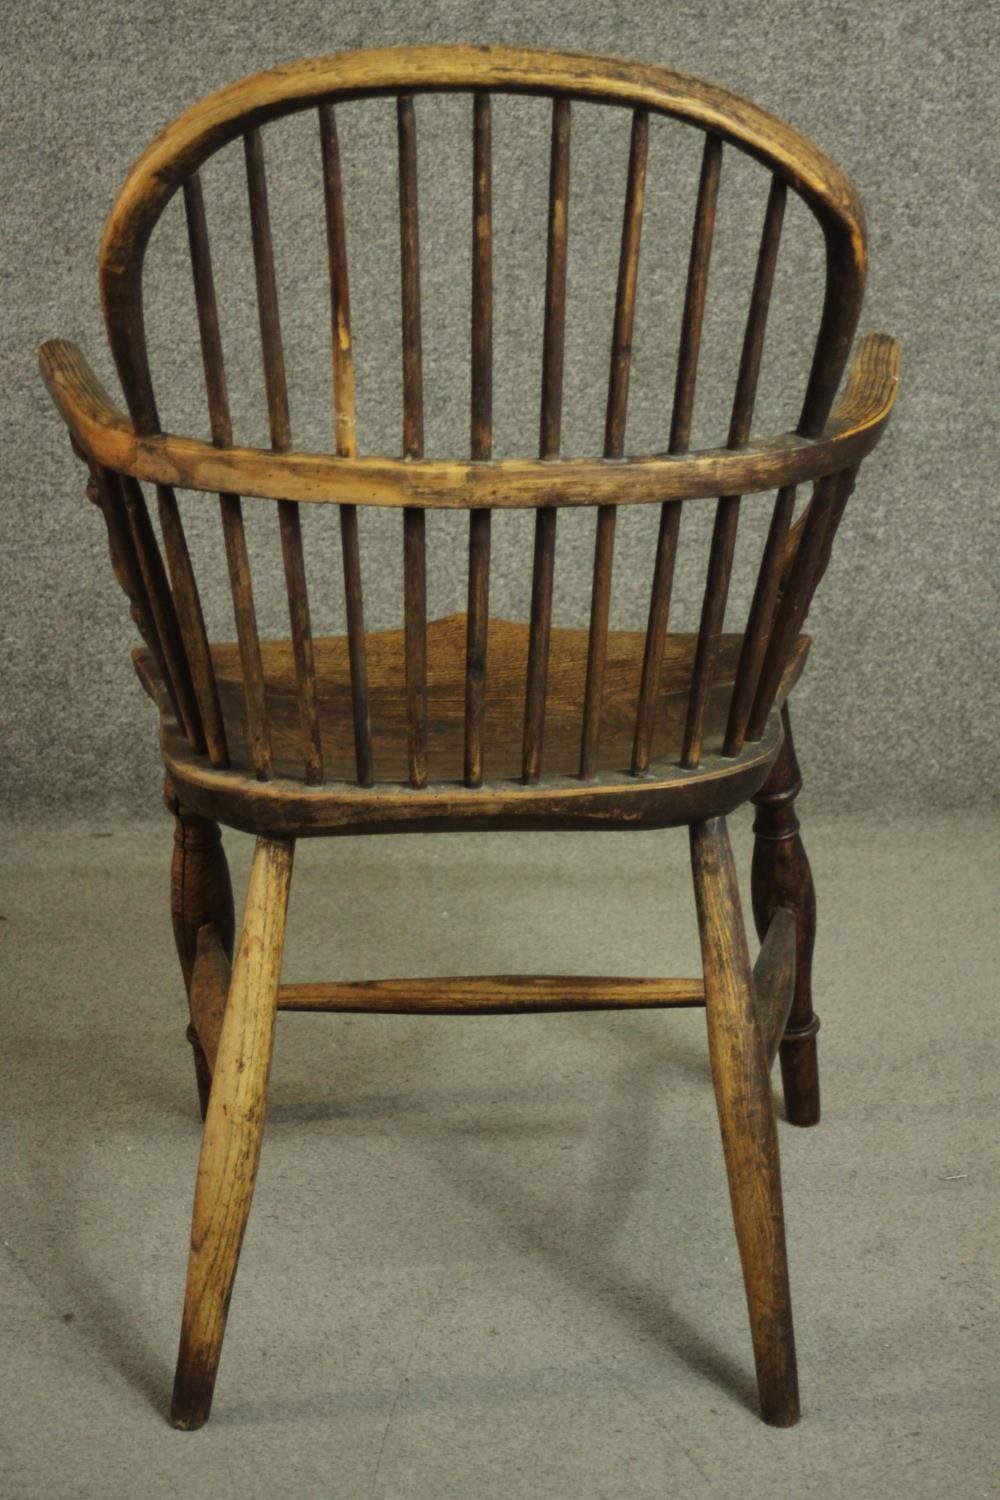 A 19th century ash hoop back Windsor armchair, with an elm seat, on turned legs joined by an H - Image 4 of 6